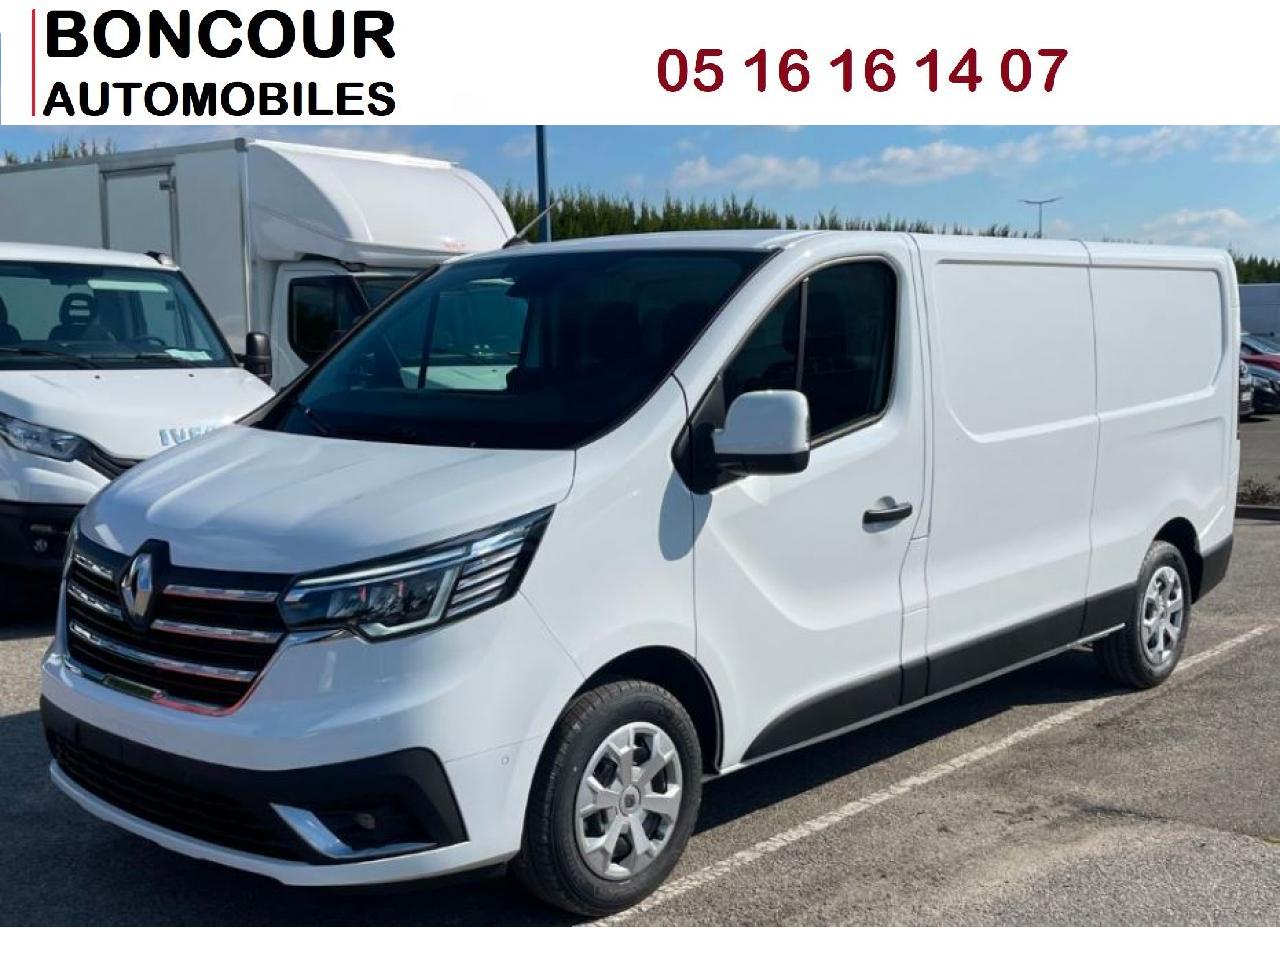 RENAULT-TRAFIC-Trafic L2H1 3000 Kg 2.0 Blue dCi - 130  III FOURGON Fourgon Confort L2H1 PHASE 3